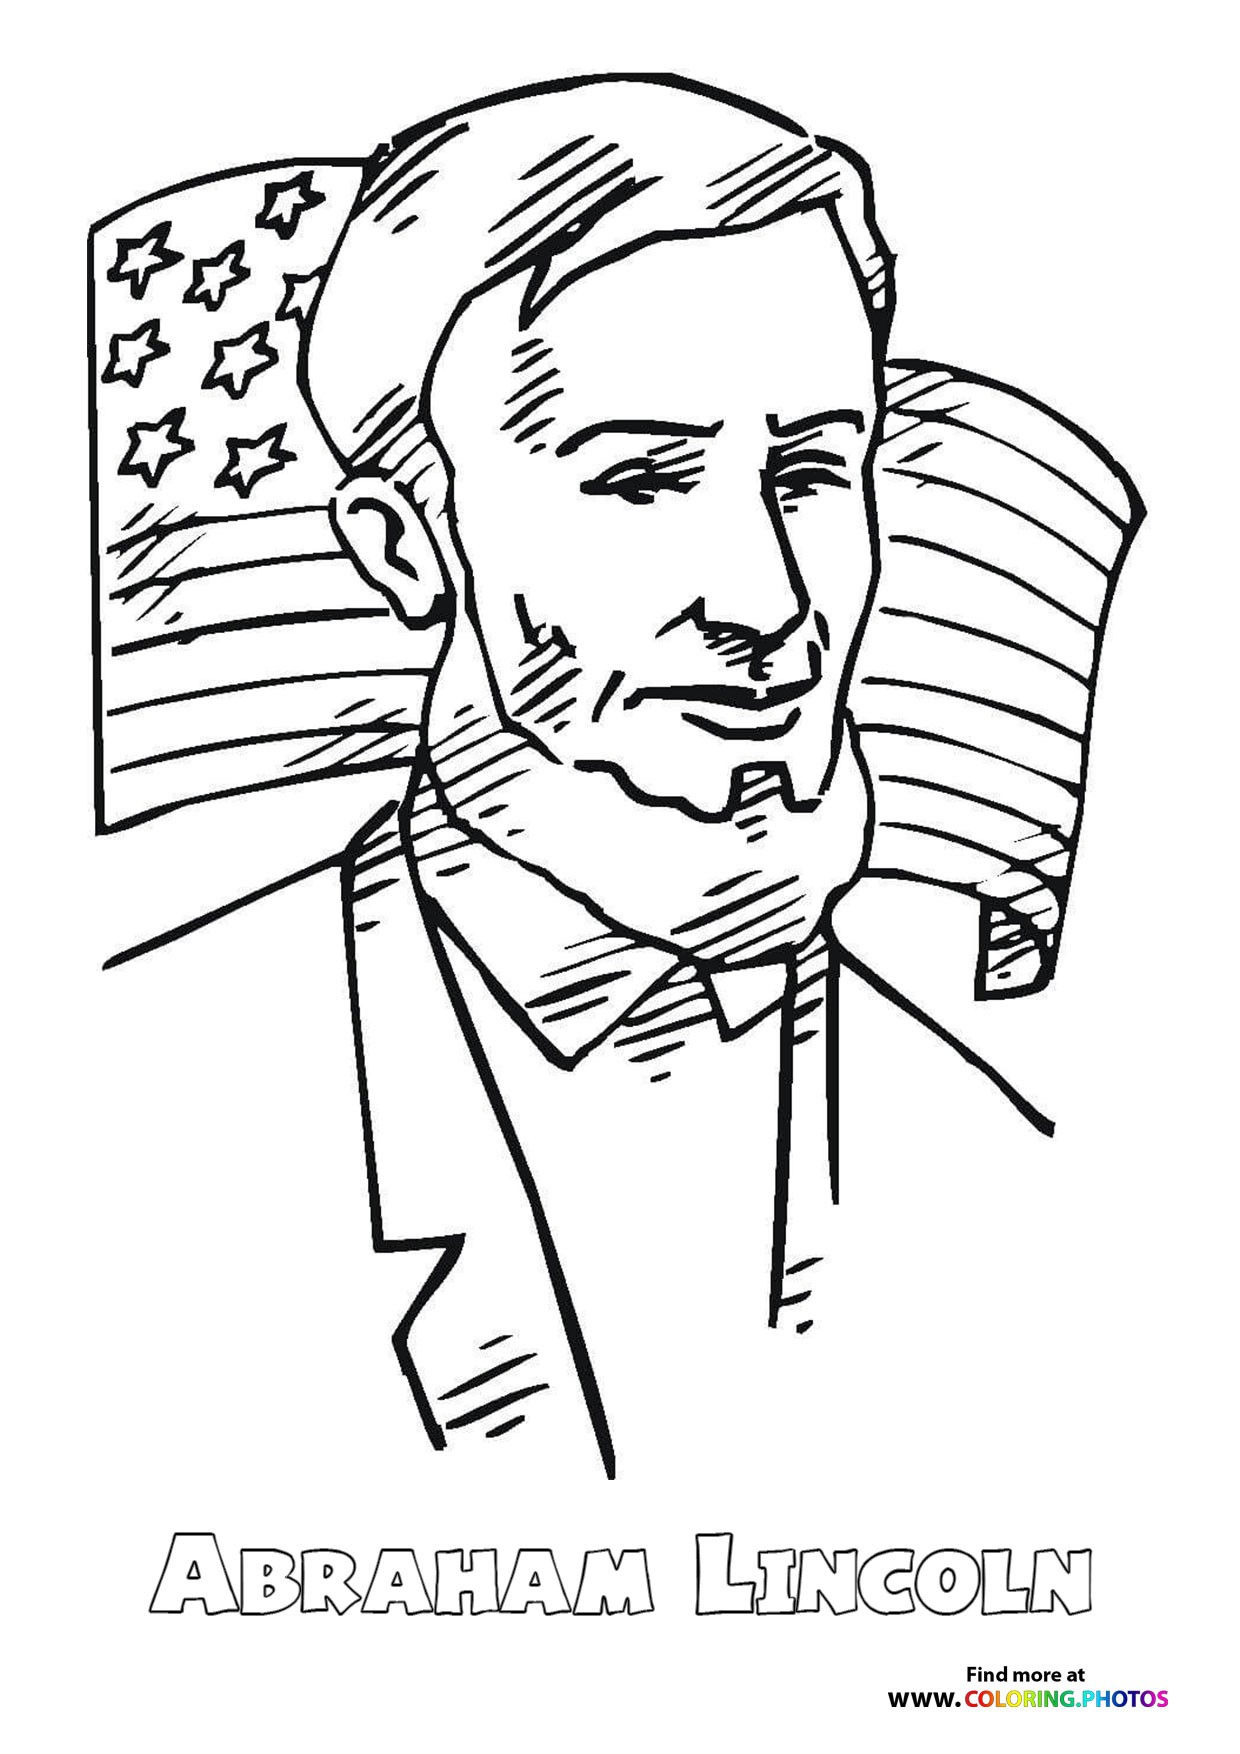 Abraham Lincoln   Coloring Pages for kids